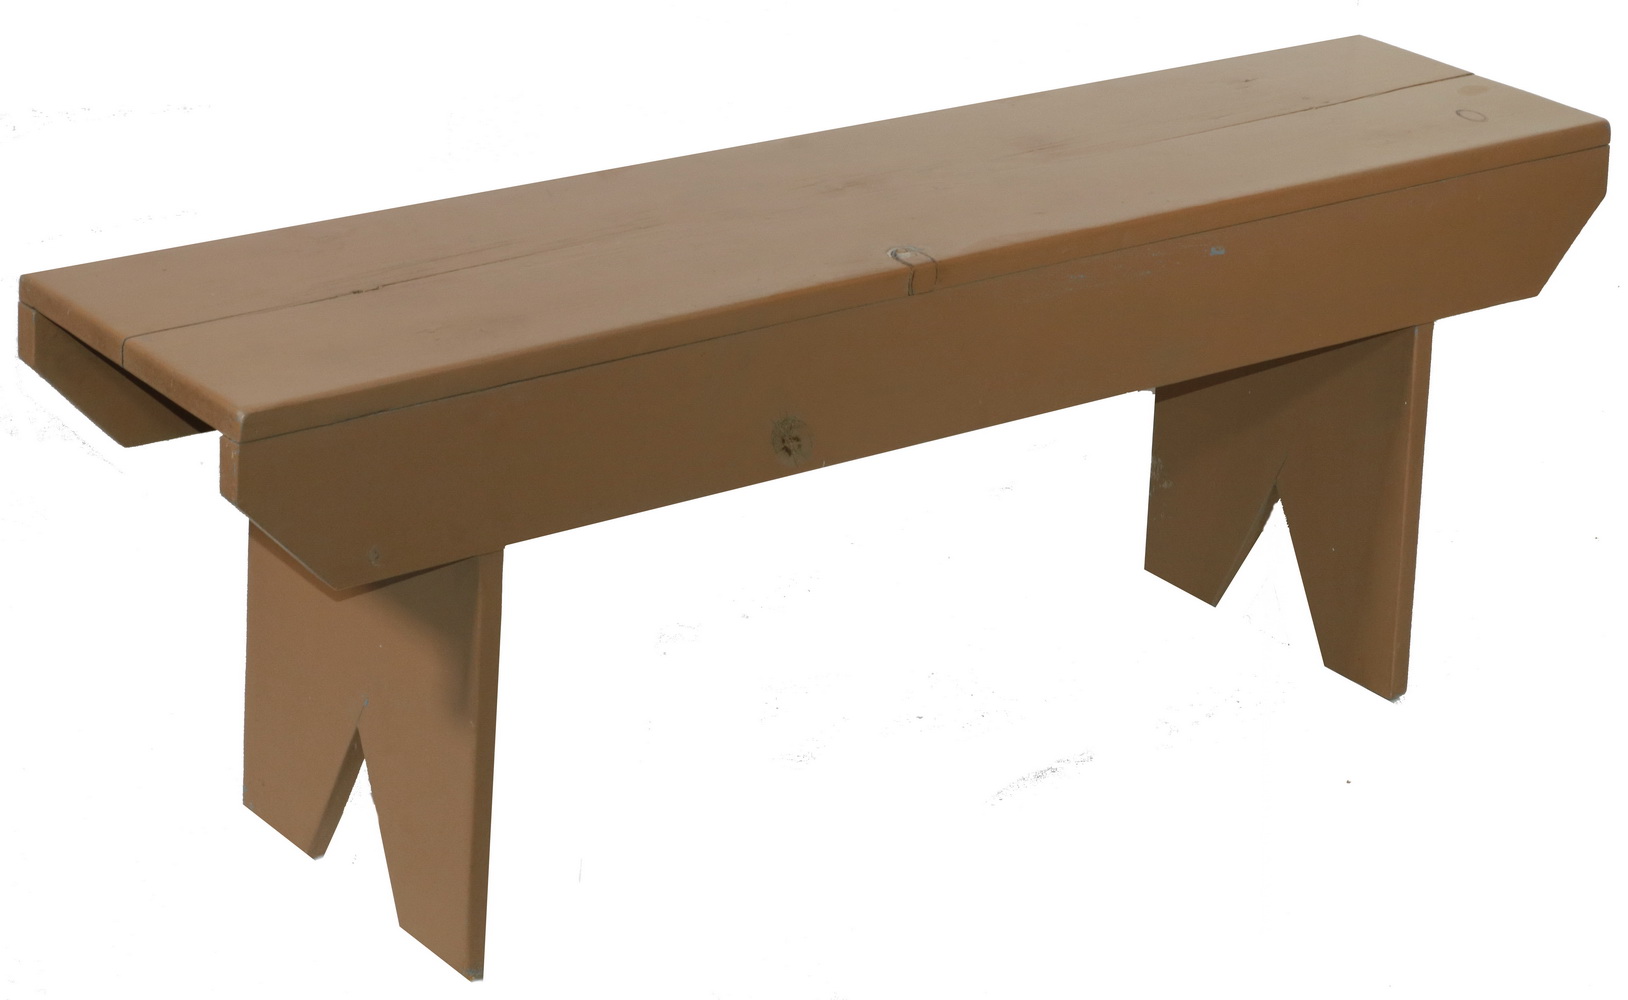 BROWN PAINTED PINE COUNTRY BENCH 2b50ae